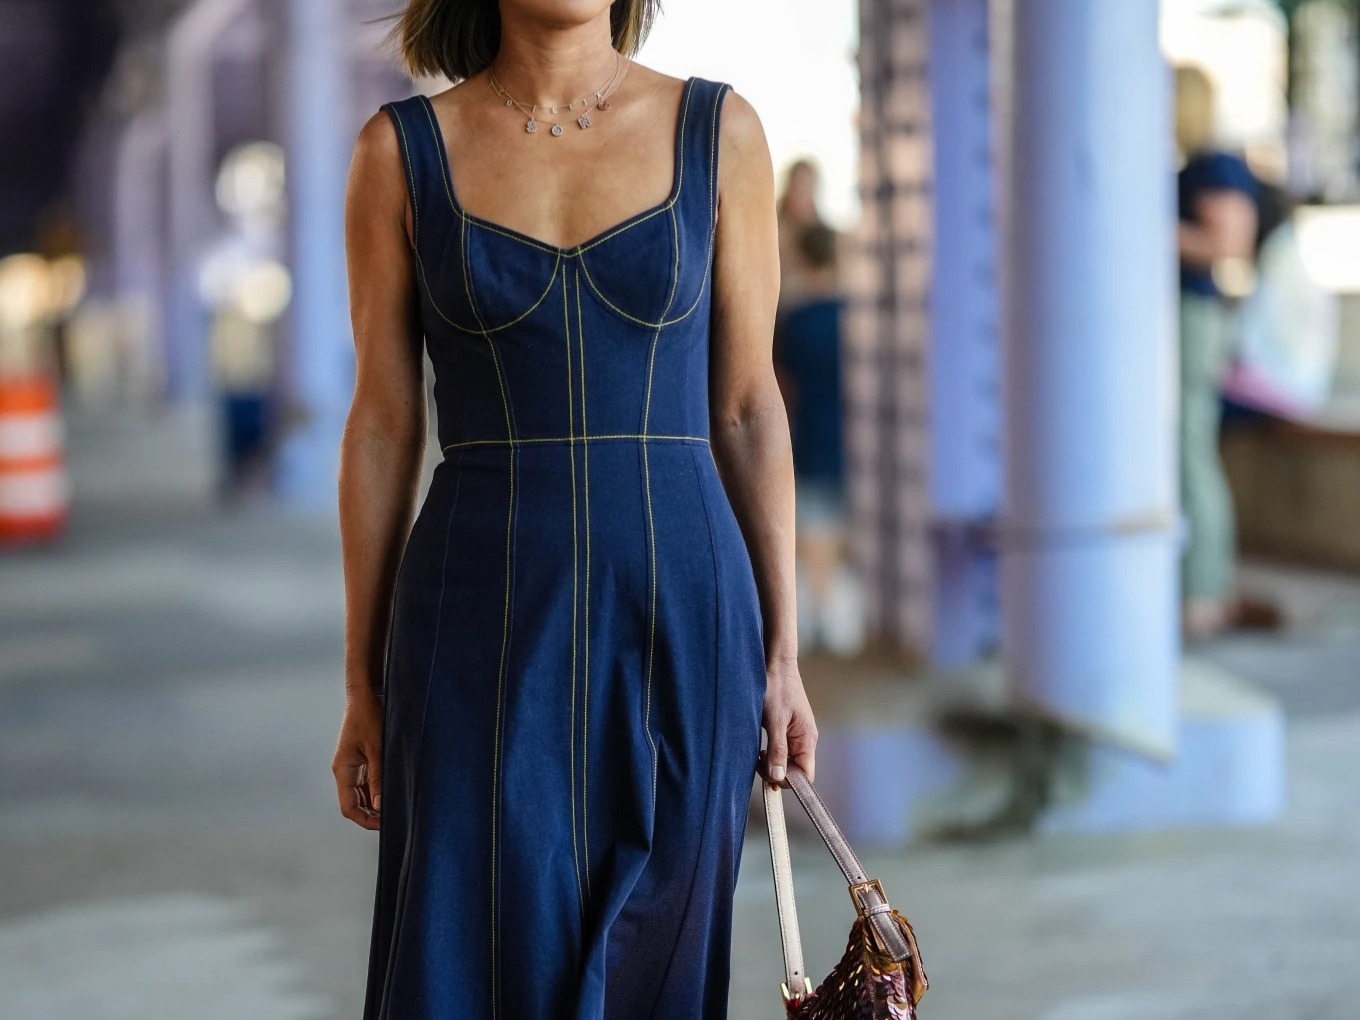 The Top 6 Dress Trends to Buy Now for Summer '23 - PureWow